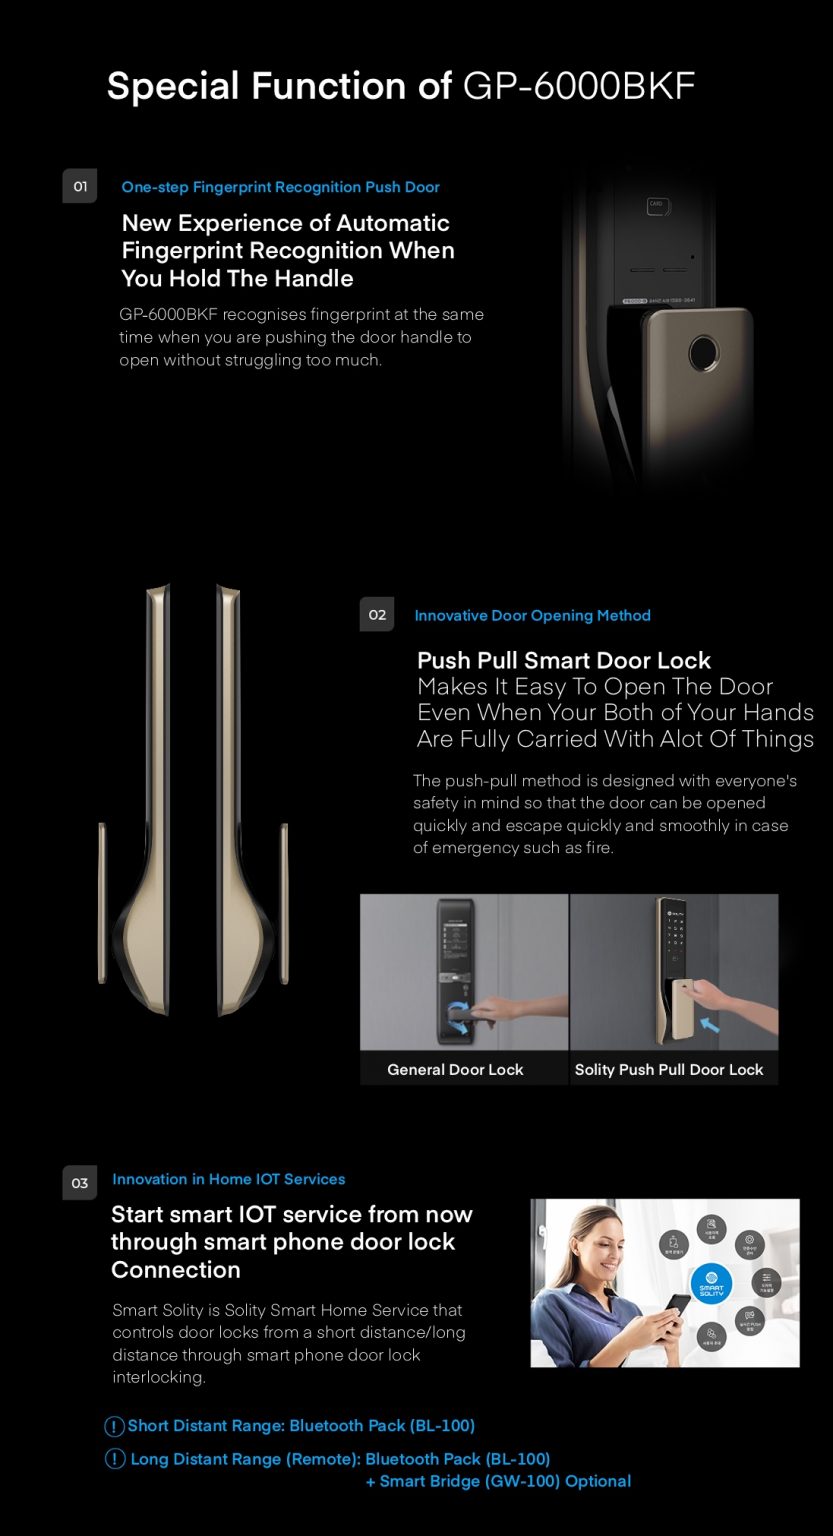 Solity GP-6000BKF One Touch Push Pull Handle Smarrt Door Lock Special Functions from Interlock Singapore